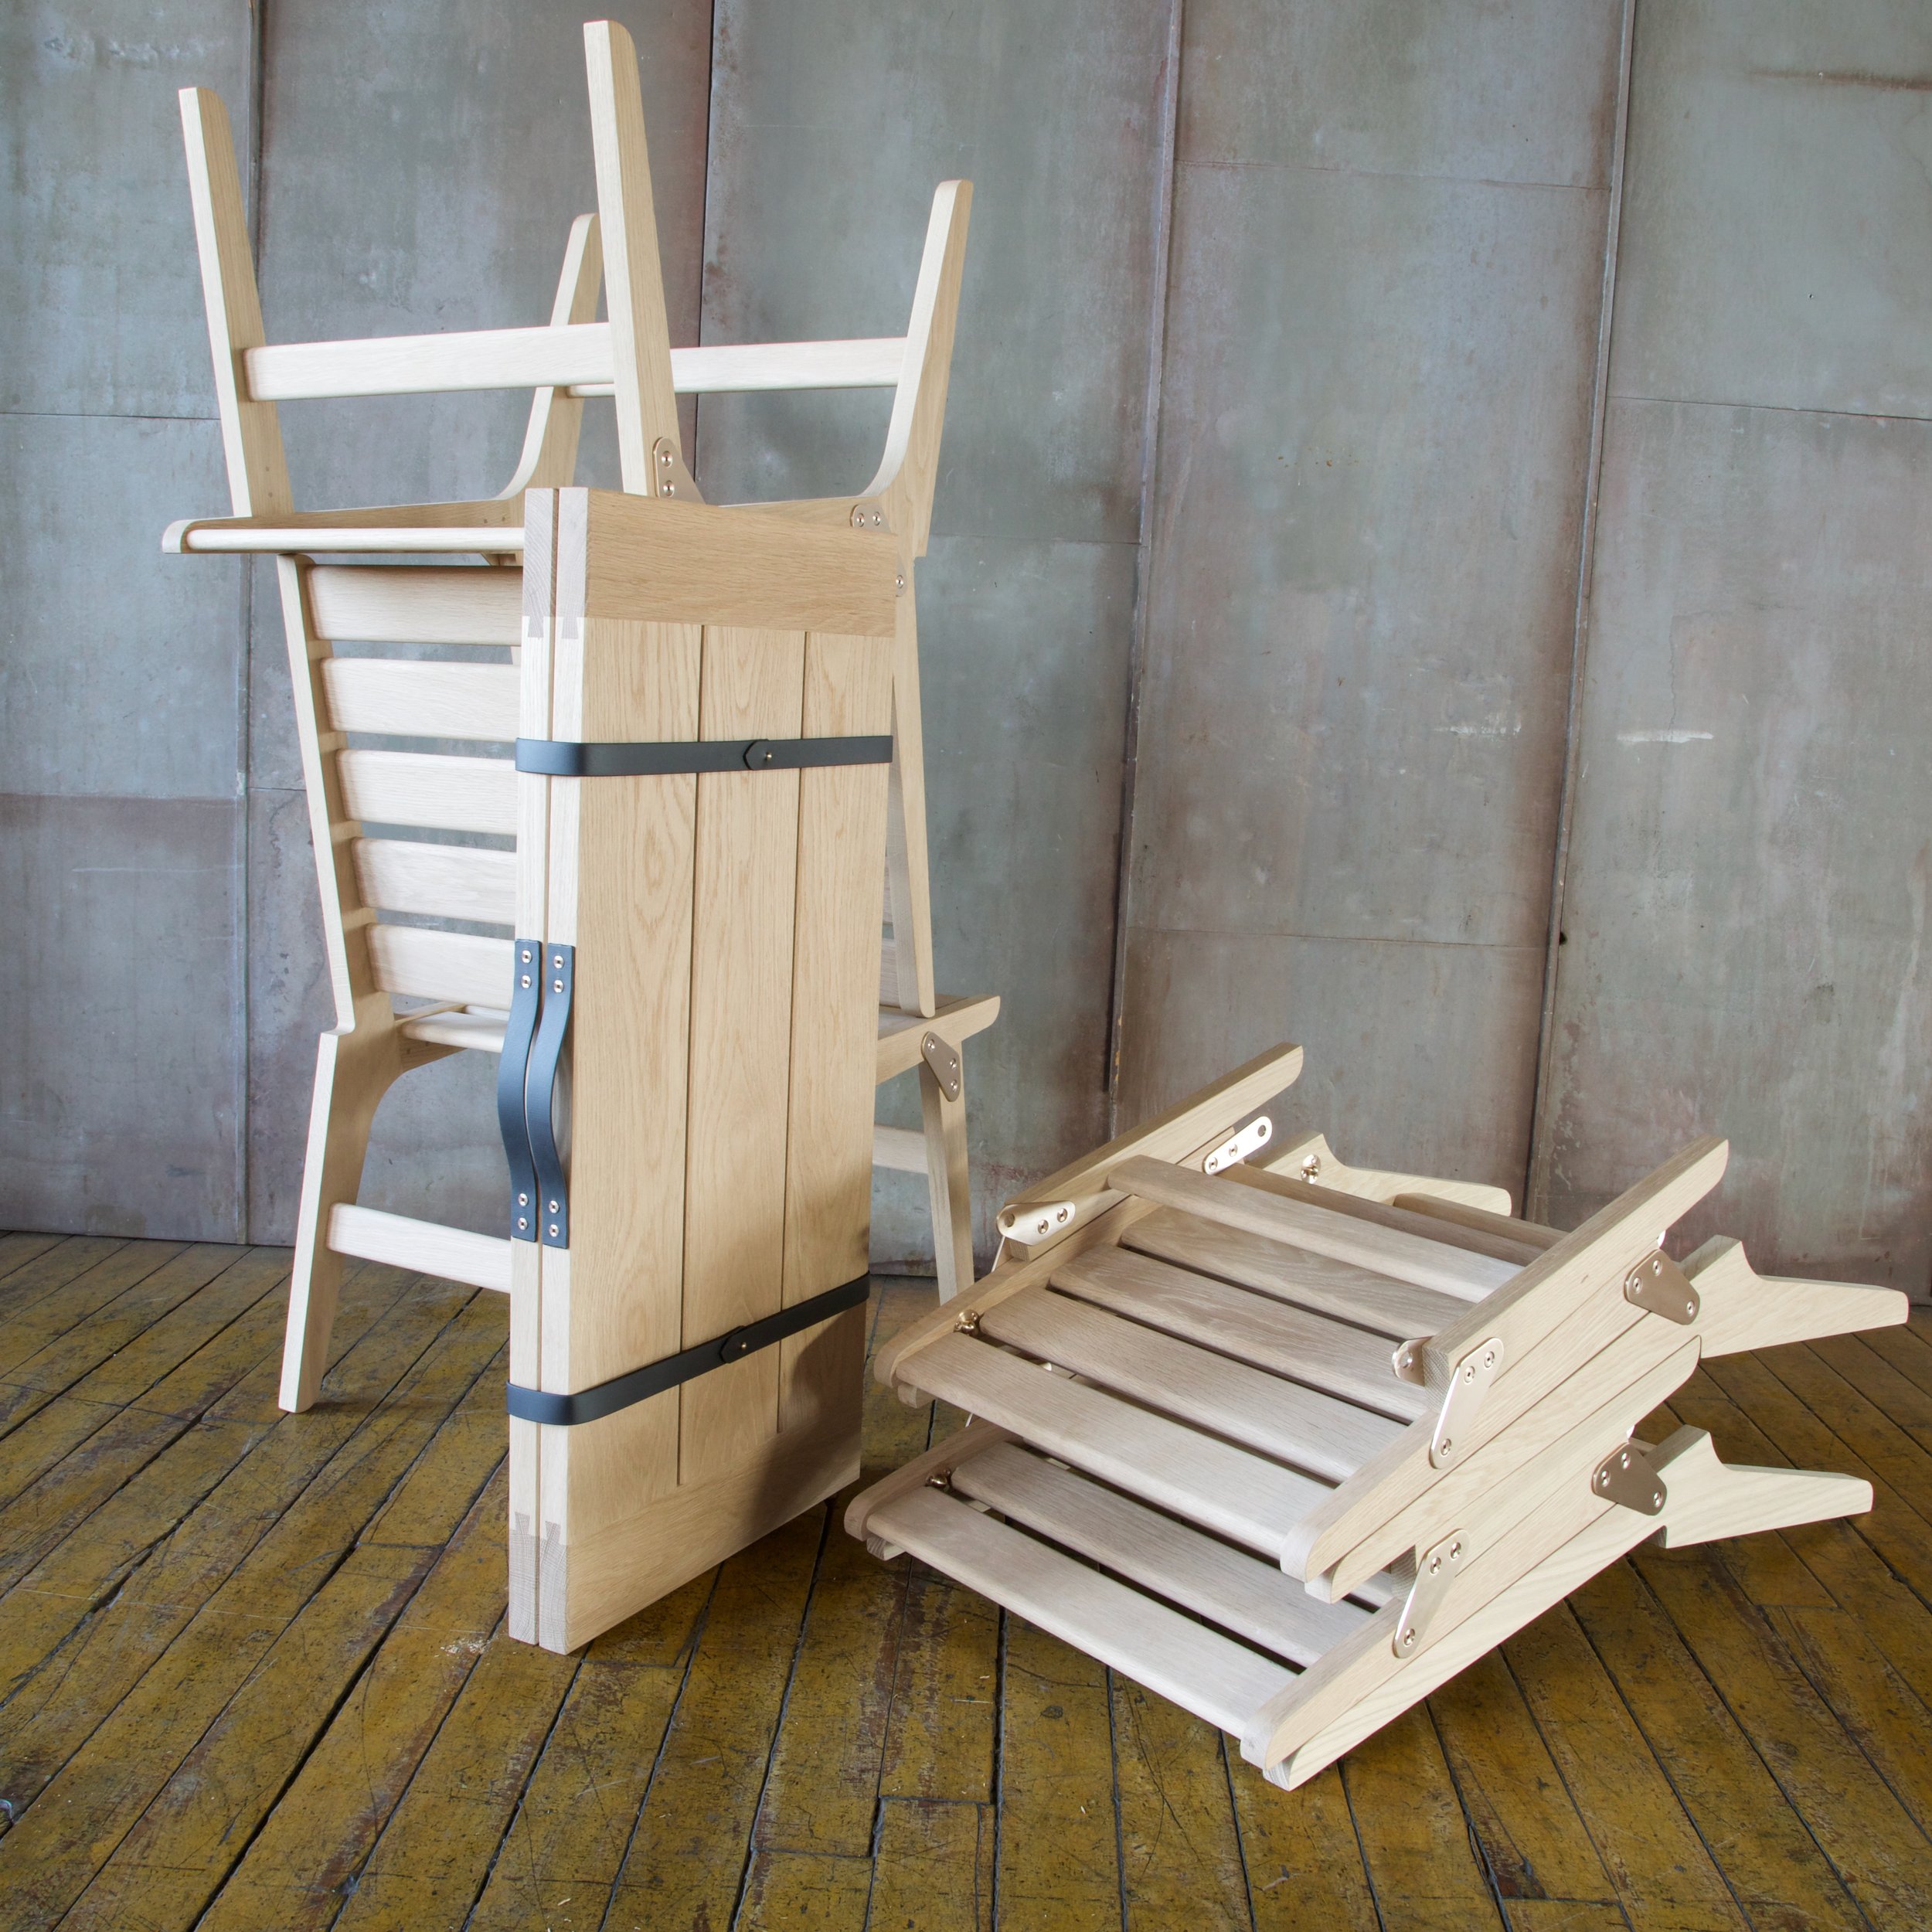 O.F.S. Chairs and Collingwood Folding Table